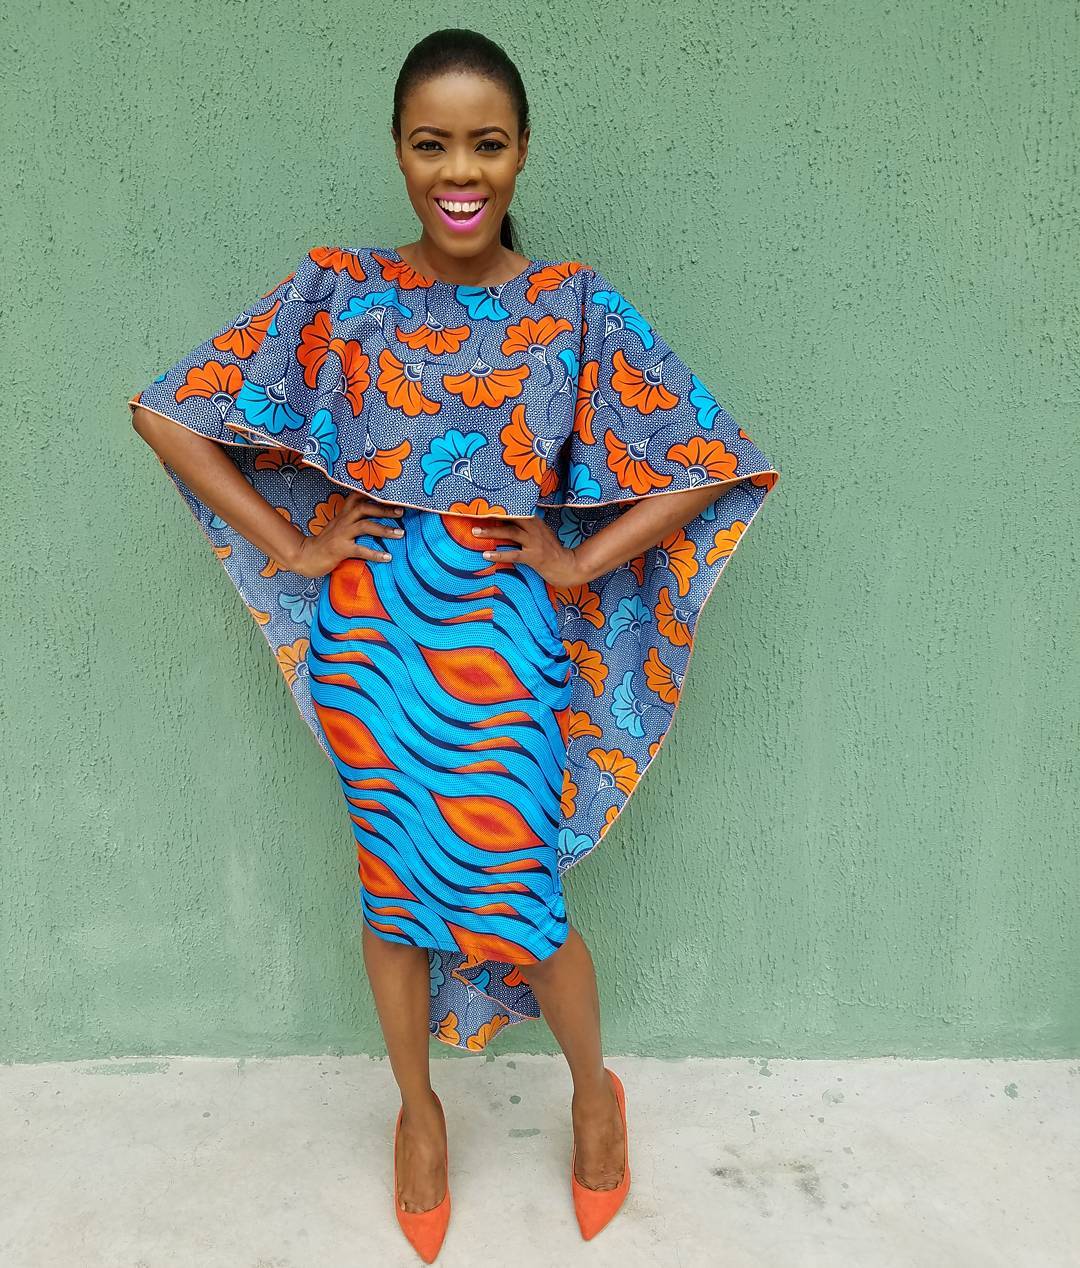 We Can't Get Enough Of Mix-Match Ankara Styles